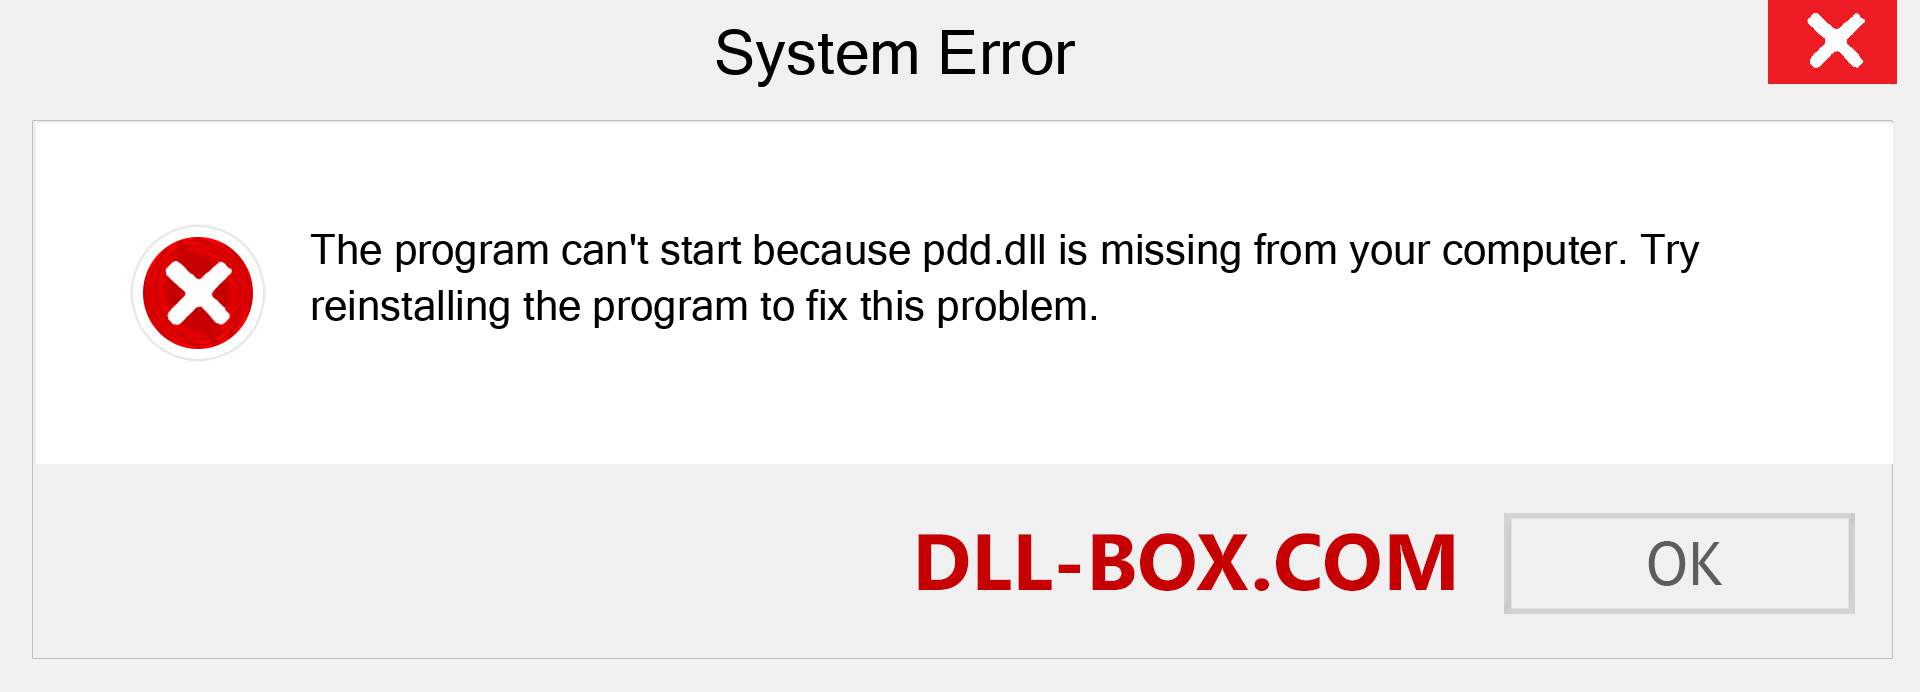  pdd.dll file is missing?. Download for Windows 7, 8, 10 - Fix  pdd dll Missing Error on Windows, photos, images